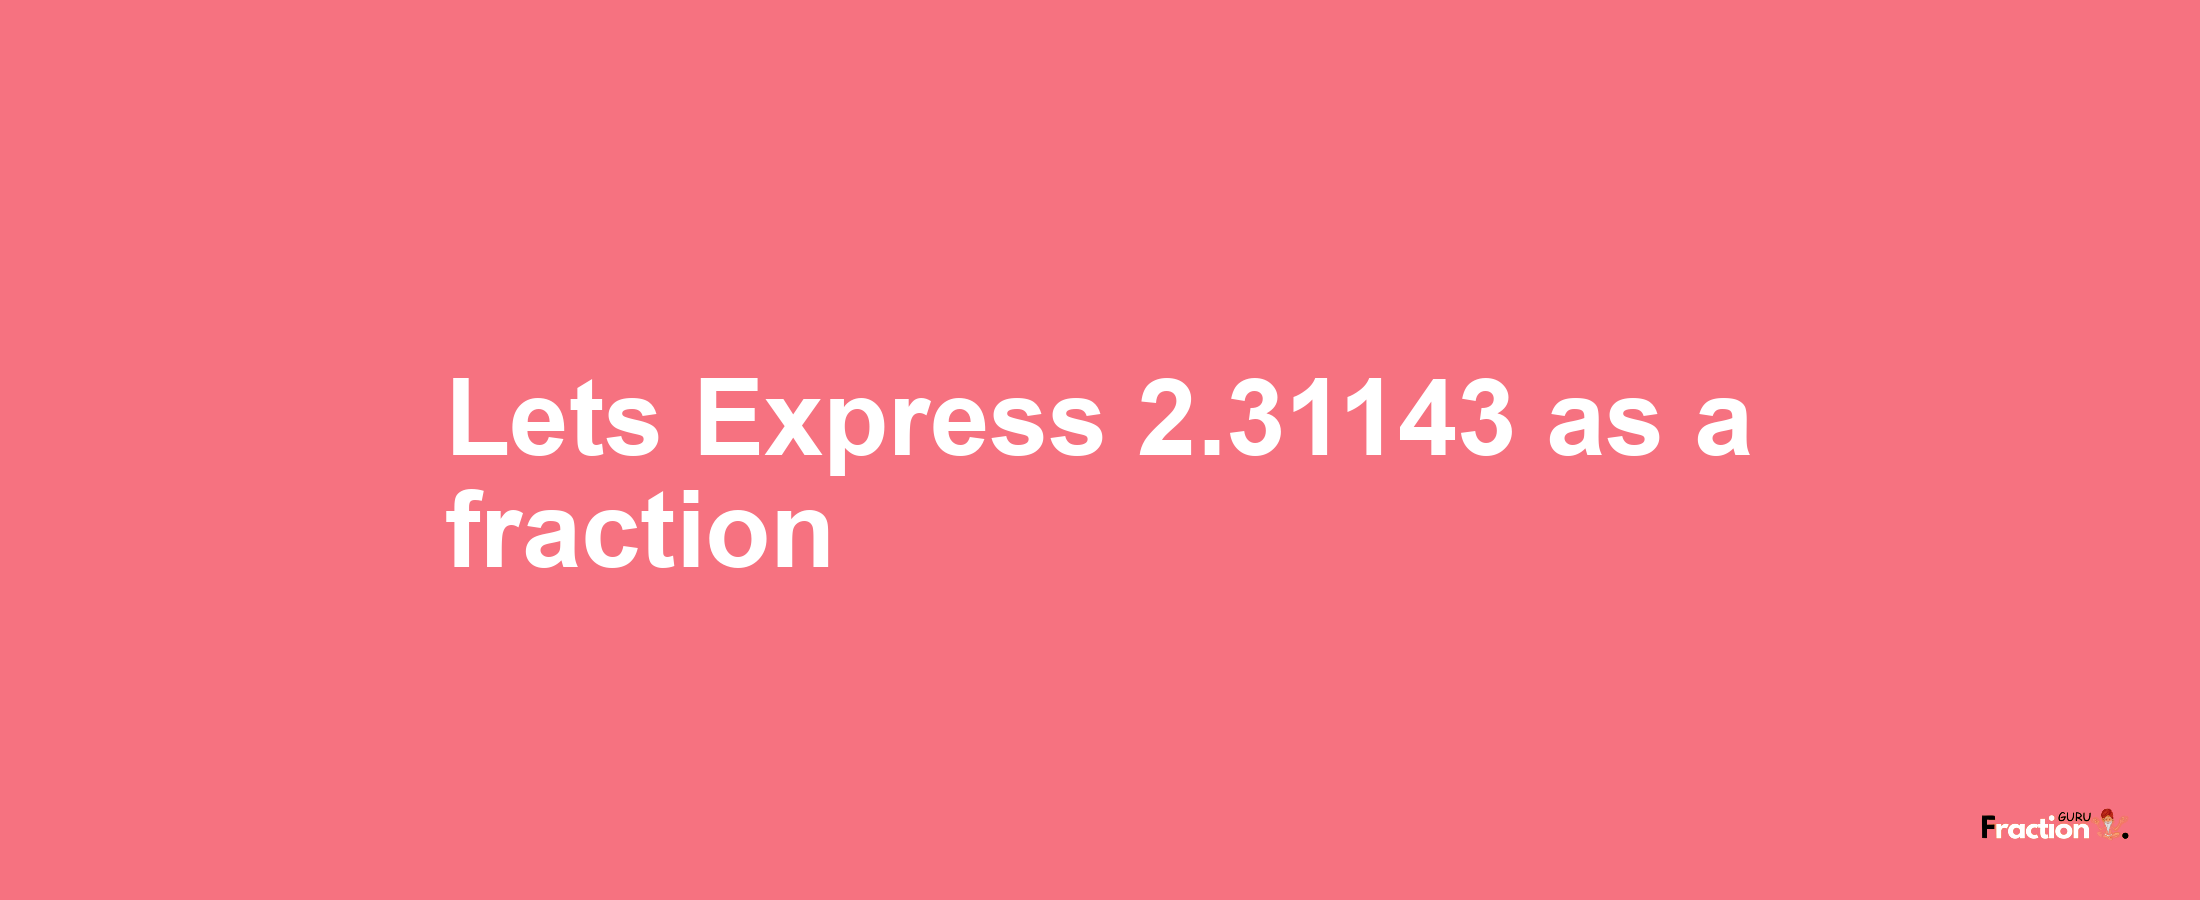 Lets Express 2.31143 as afraction